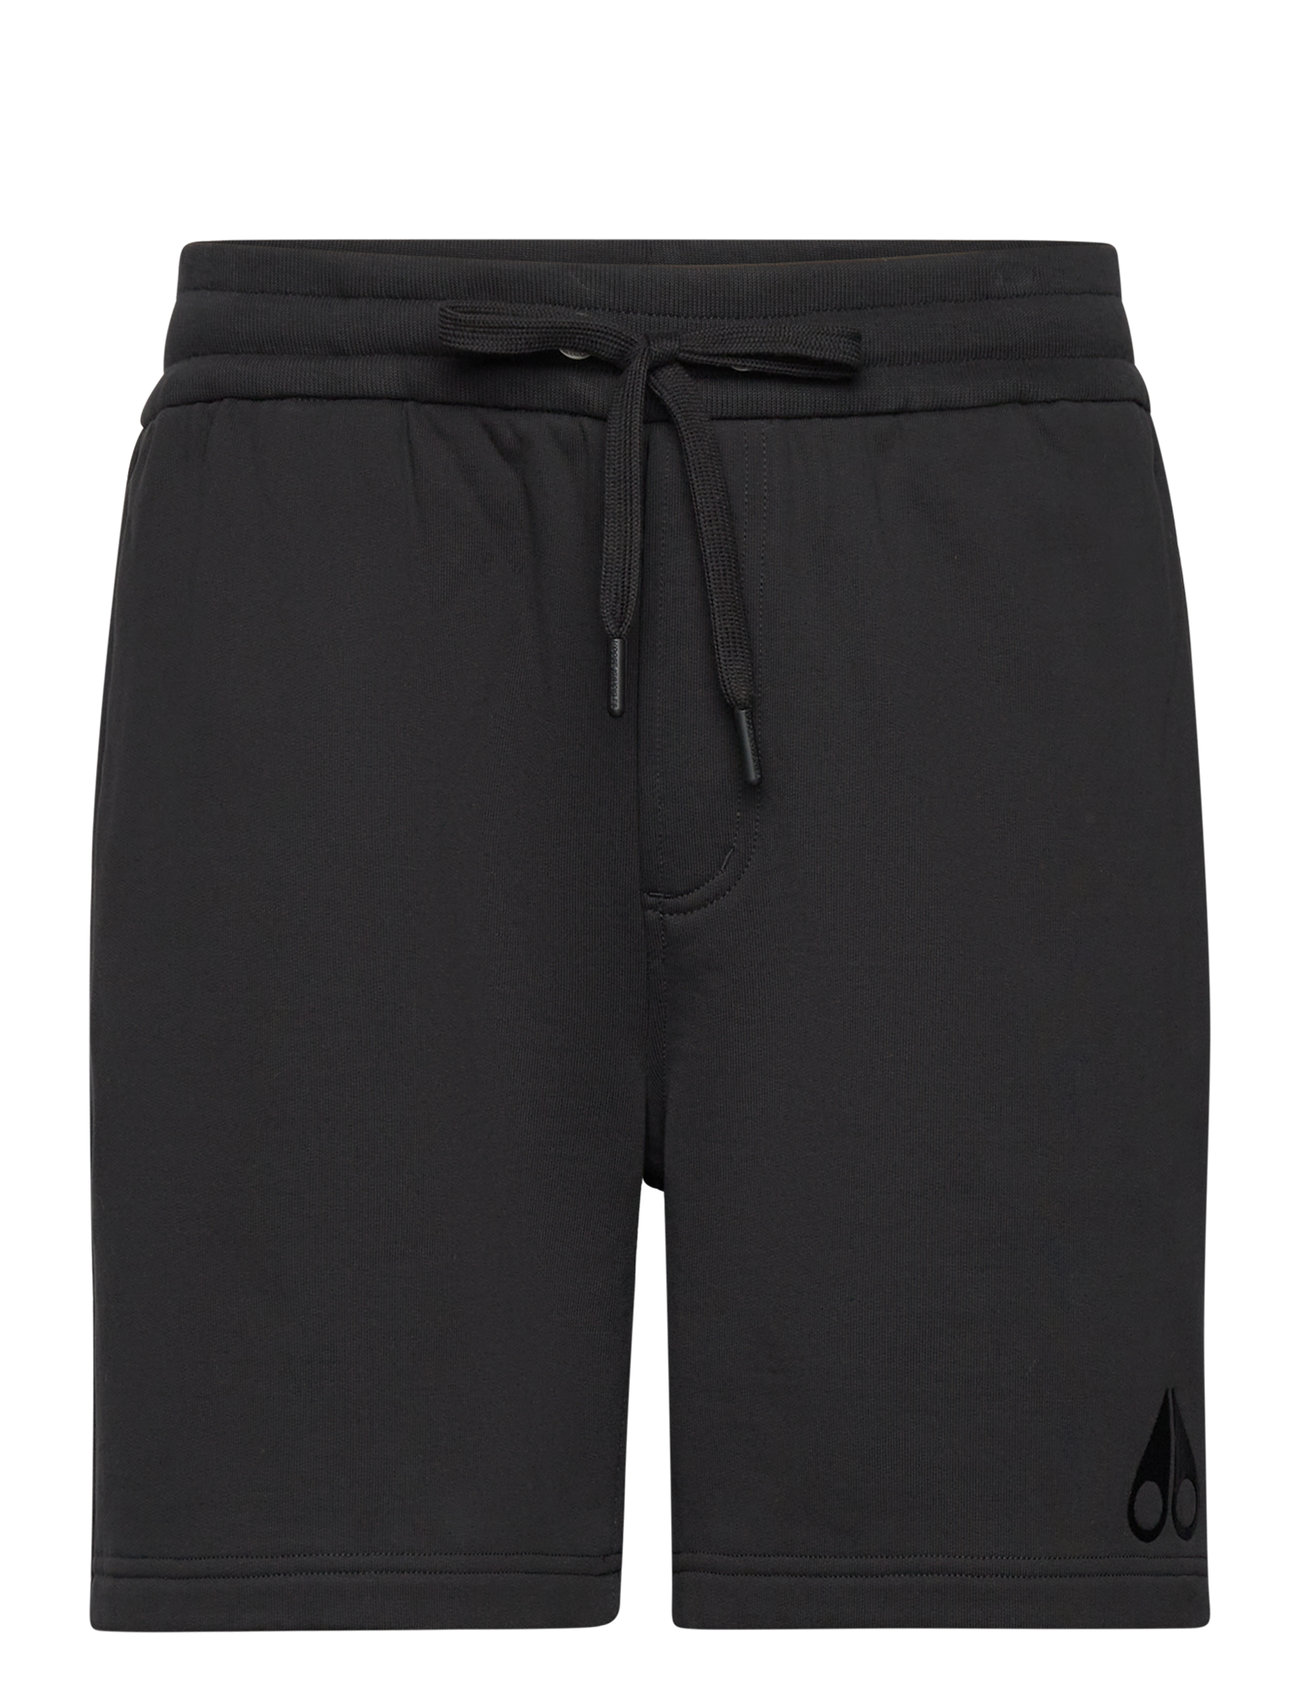 Clyde Shorts Bottoms Shorts Sweat Shorts Black Moose Knuckles